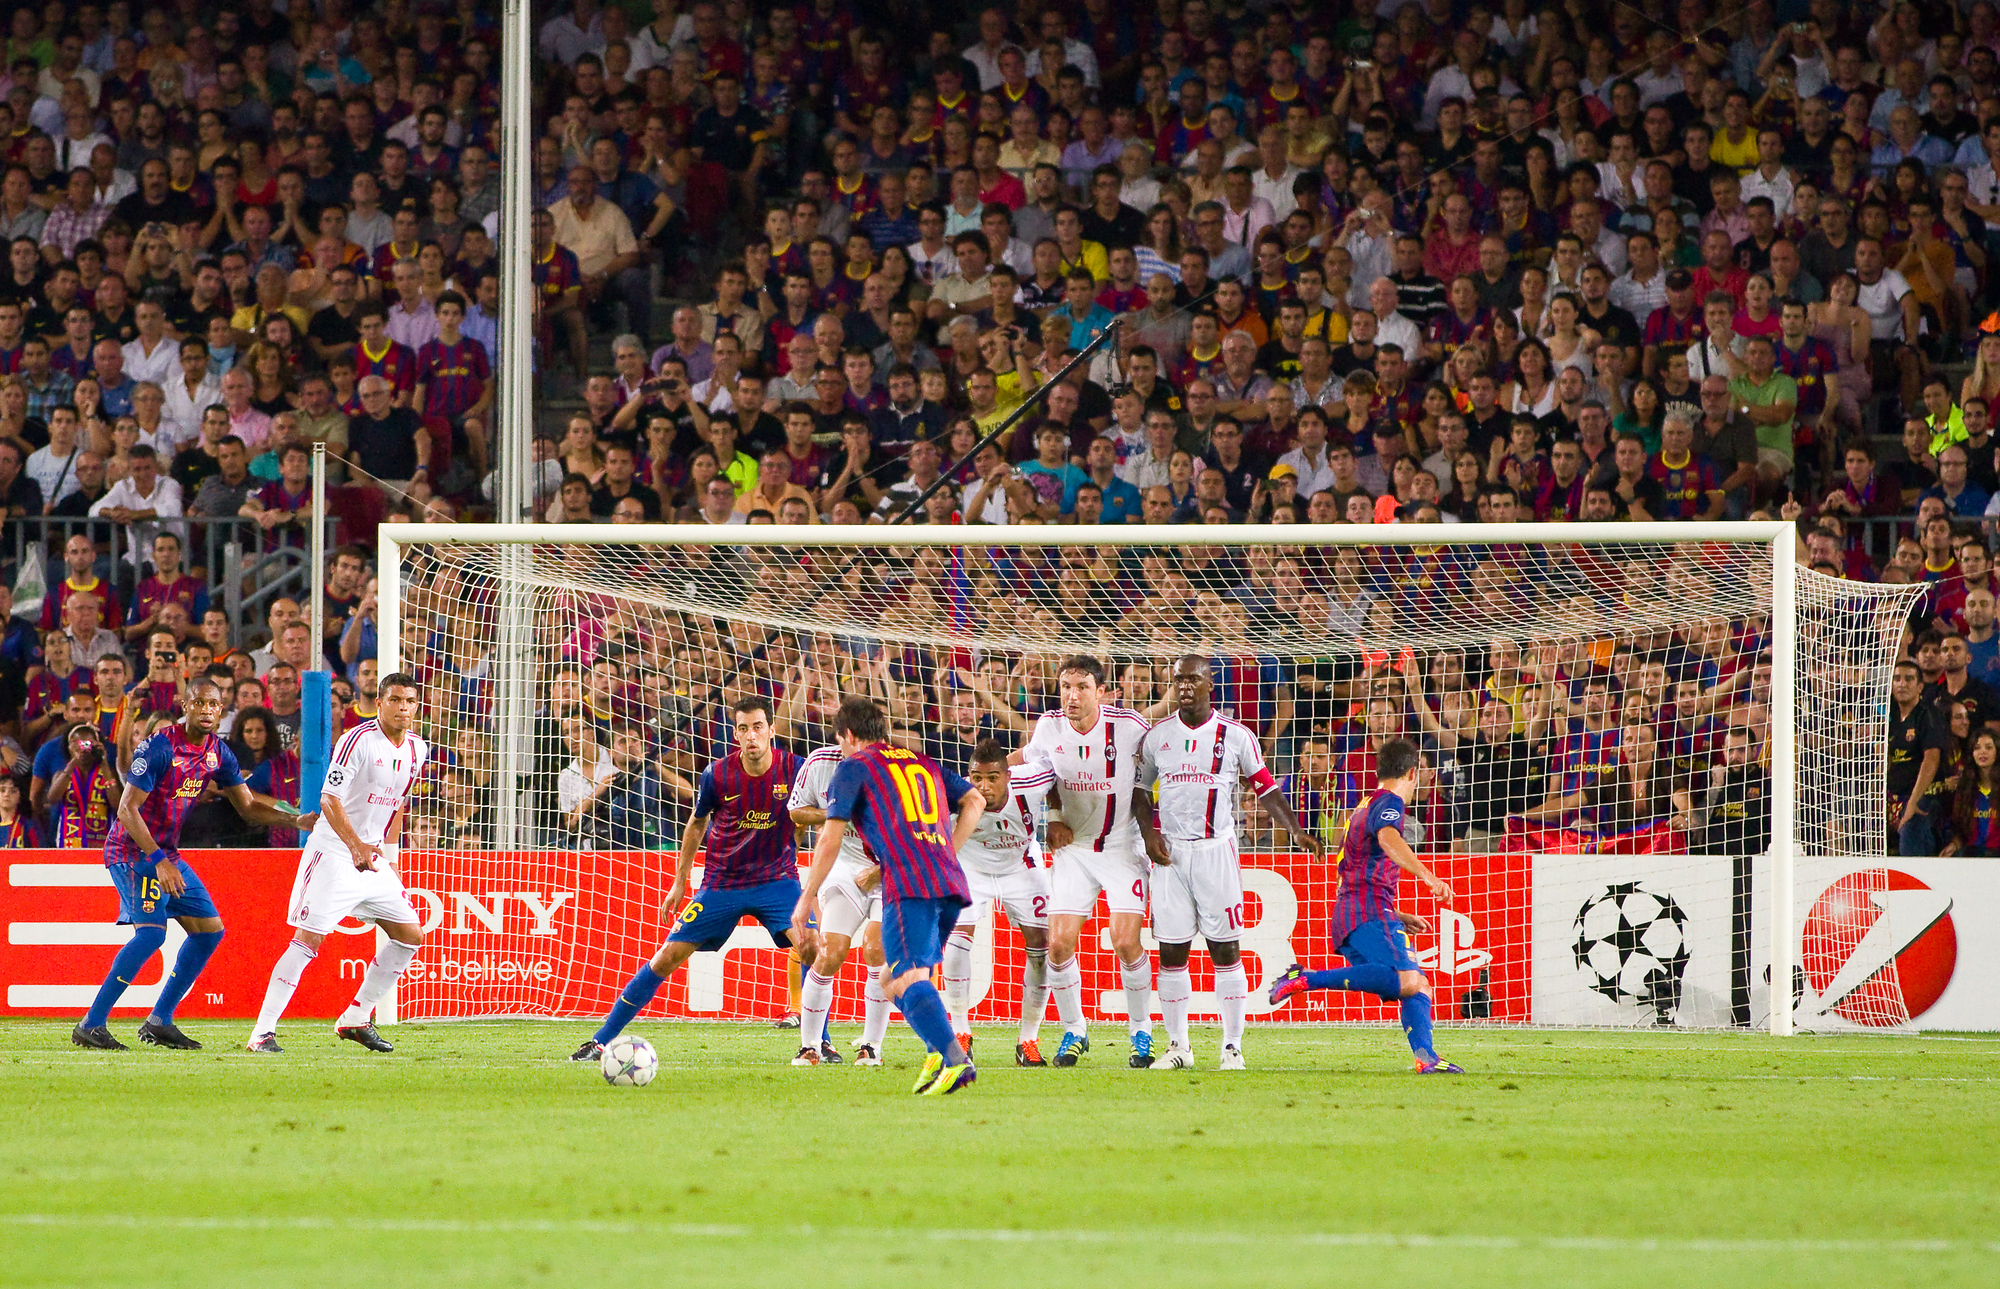 Leo Messi (10) shoots a free kick during the Champions League match between FC Barcelona and Milan, final score 2 - 2, on September 13, 2011, in Camp Nou, Barcelona, Spain.